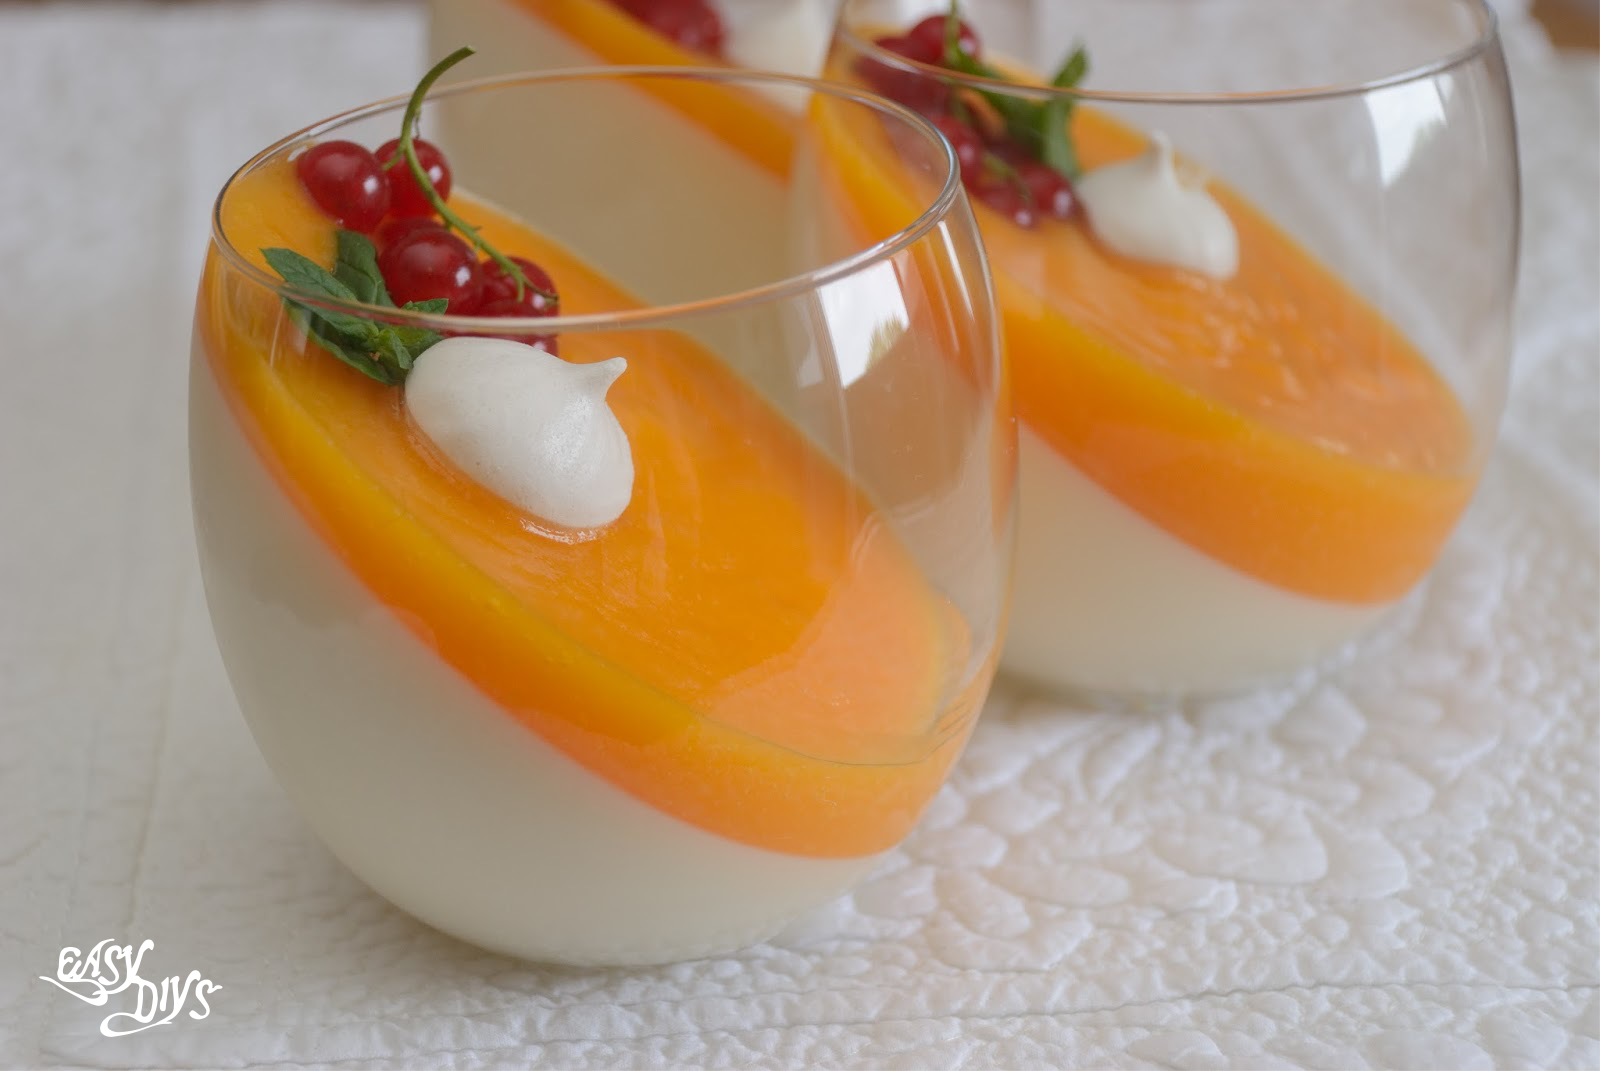 Tropical Breeze Coconut Jelly